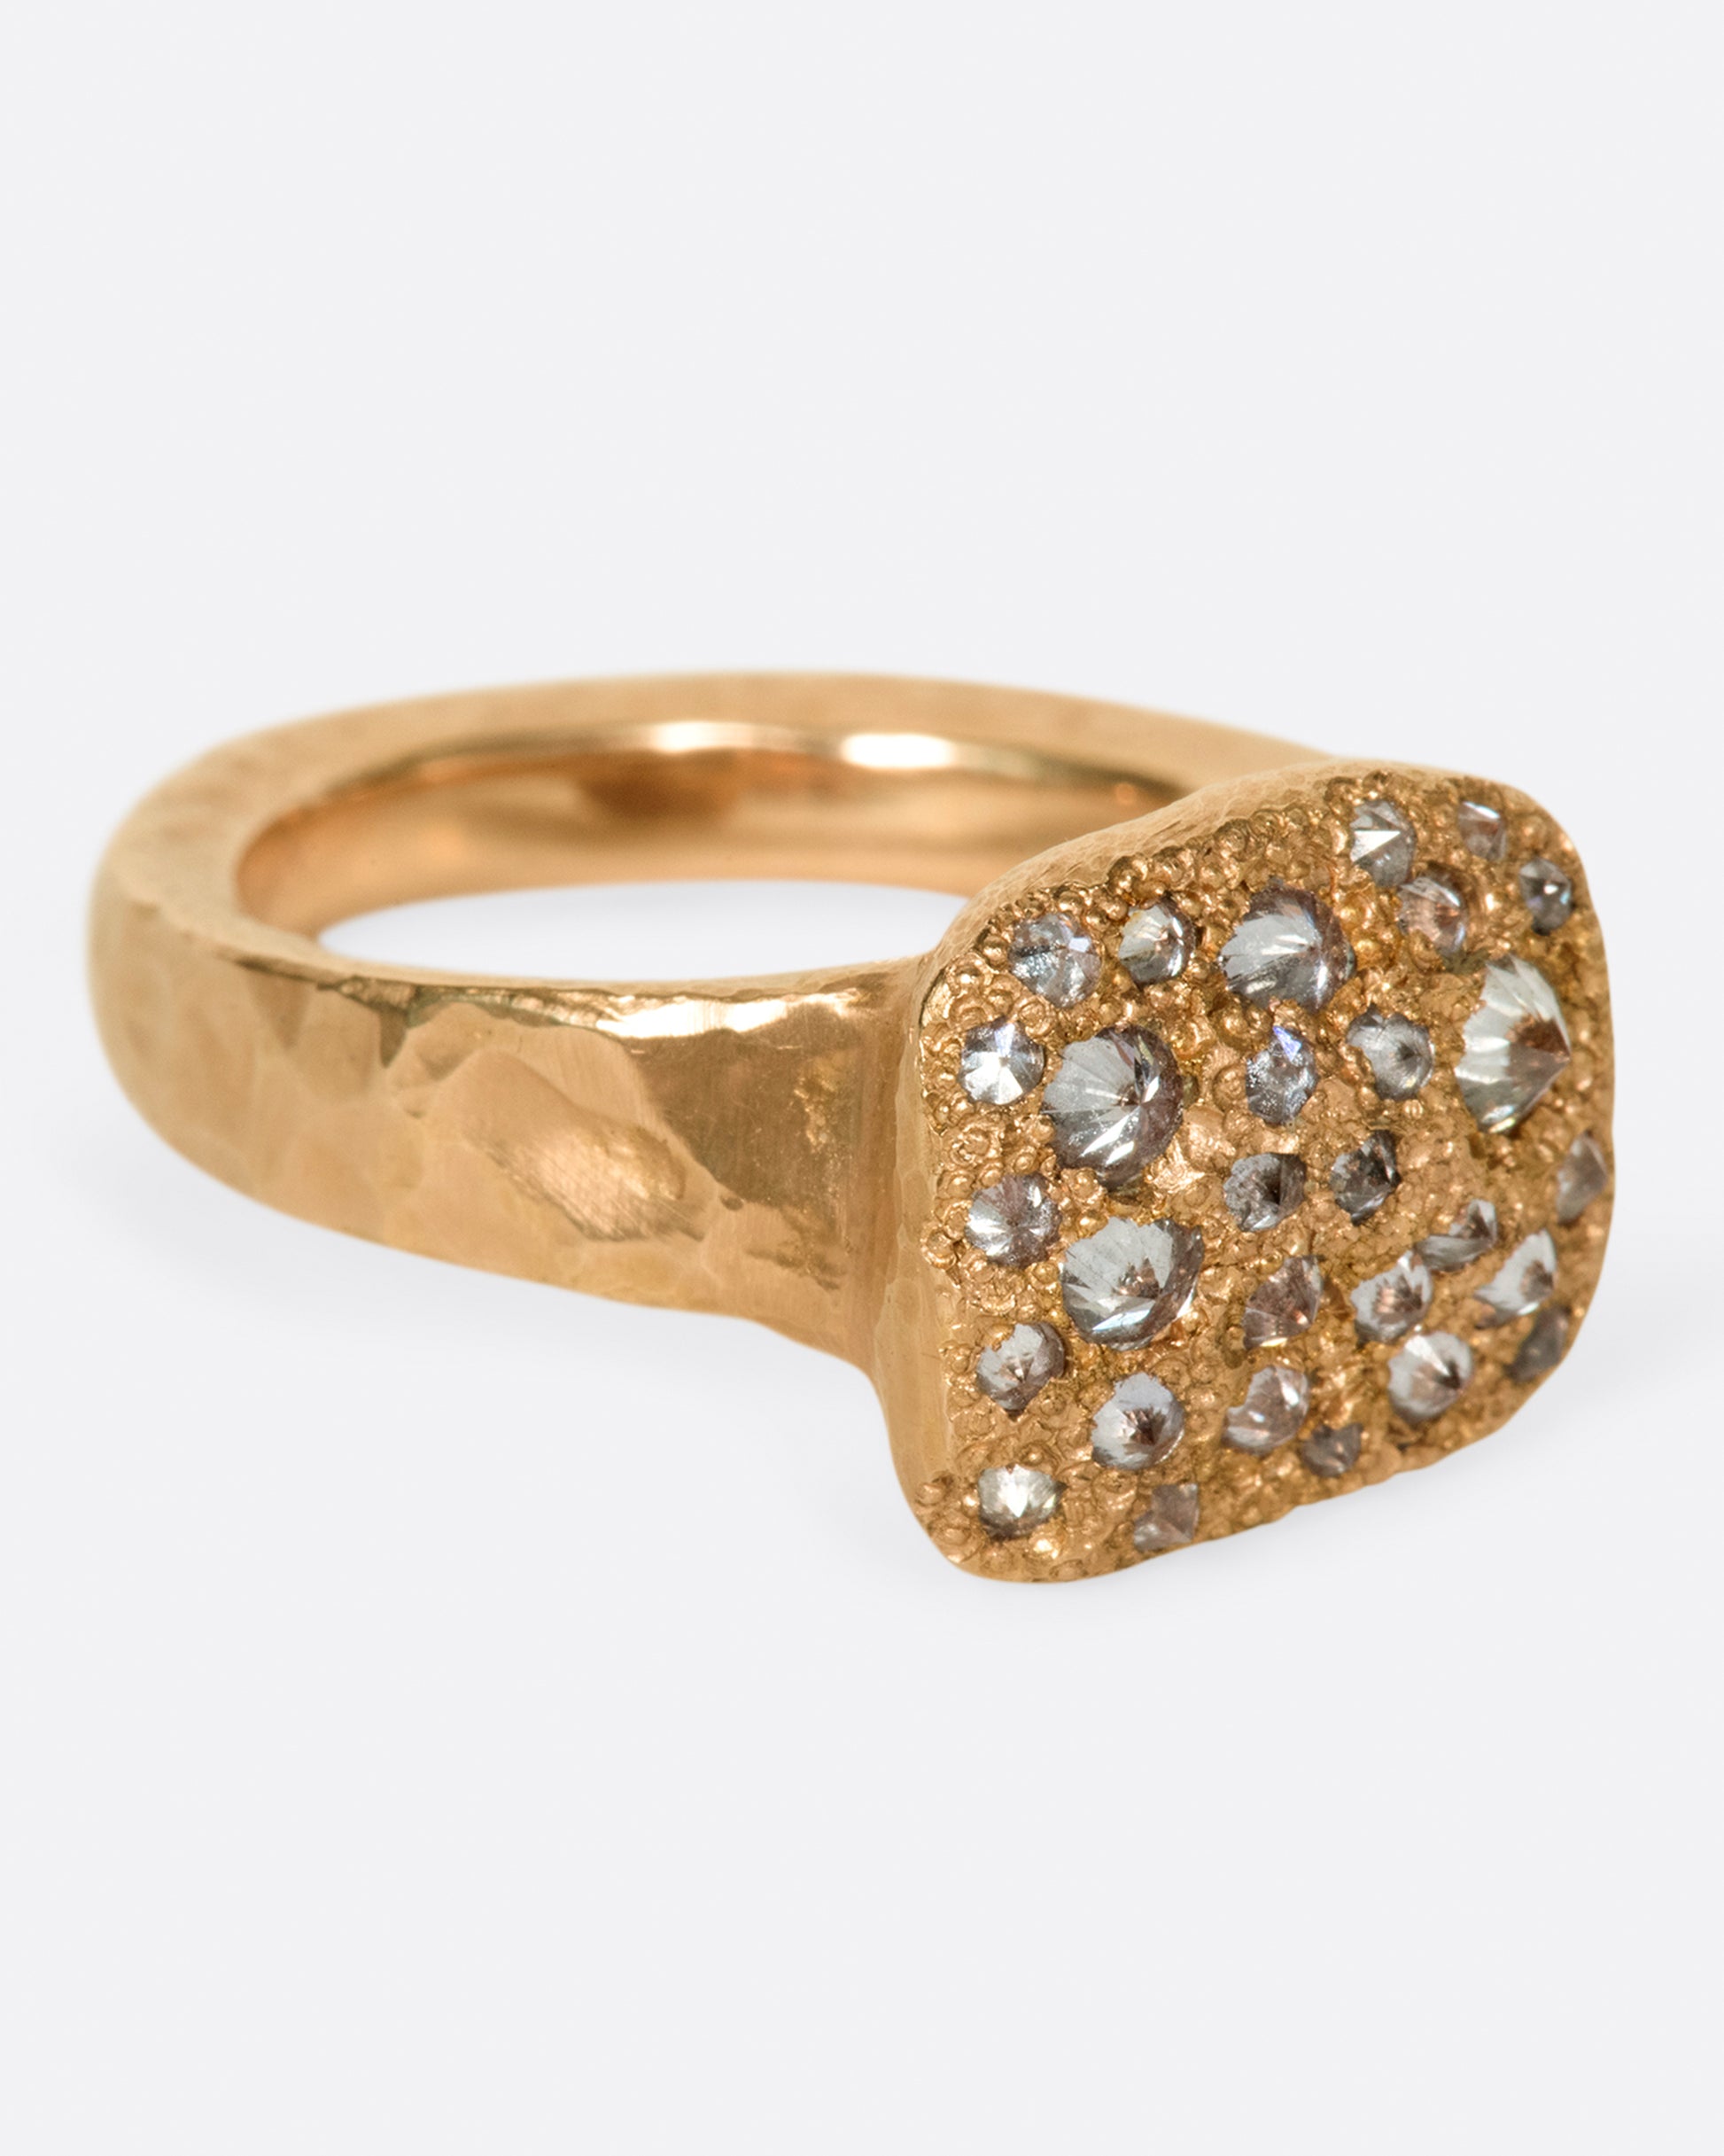 A hammered, hefty rose gold ring with inverted diamonds scattered across its rectangular face.